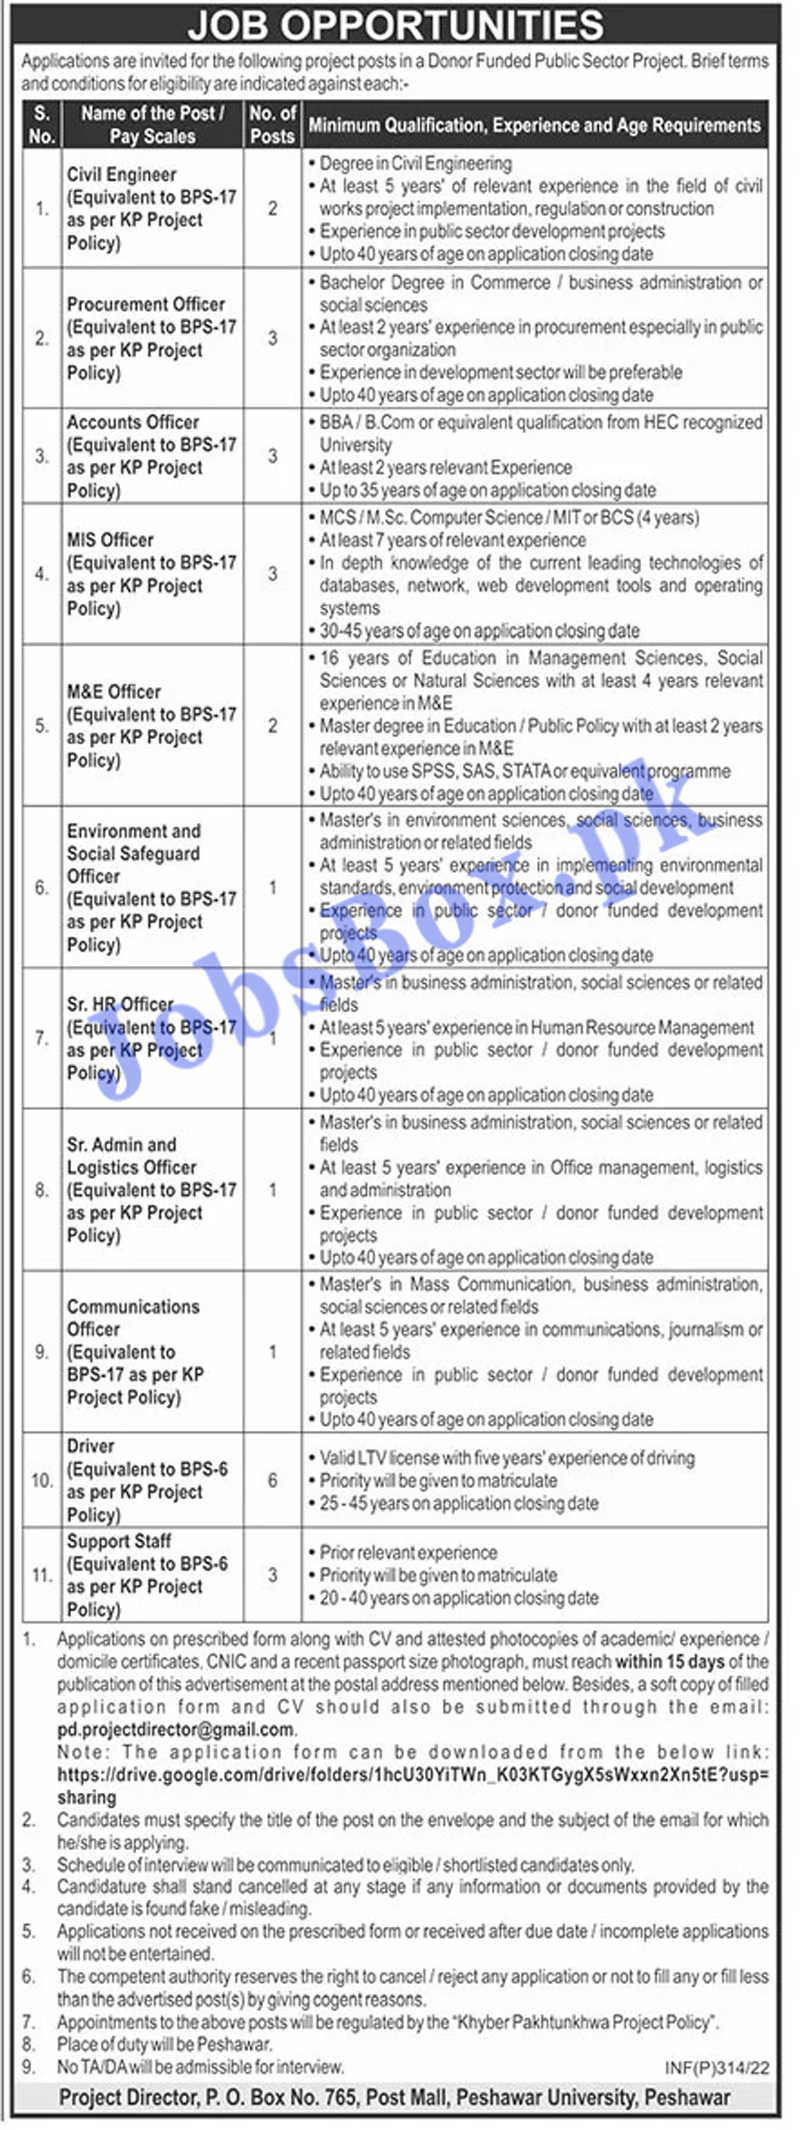 PO Box 765 Peshawar Jobs 2022 in Donor Funded Project